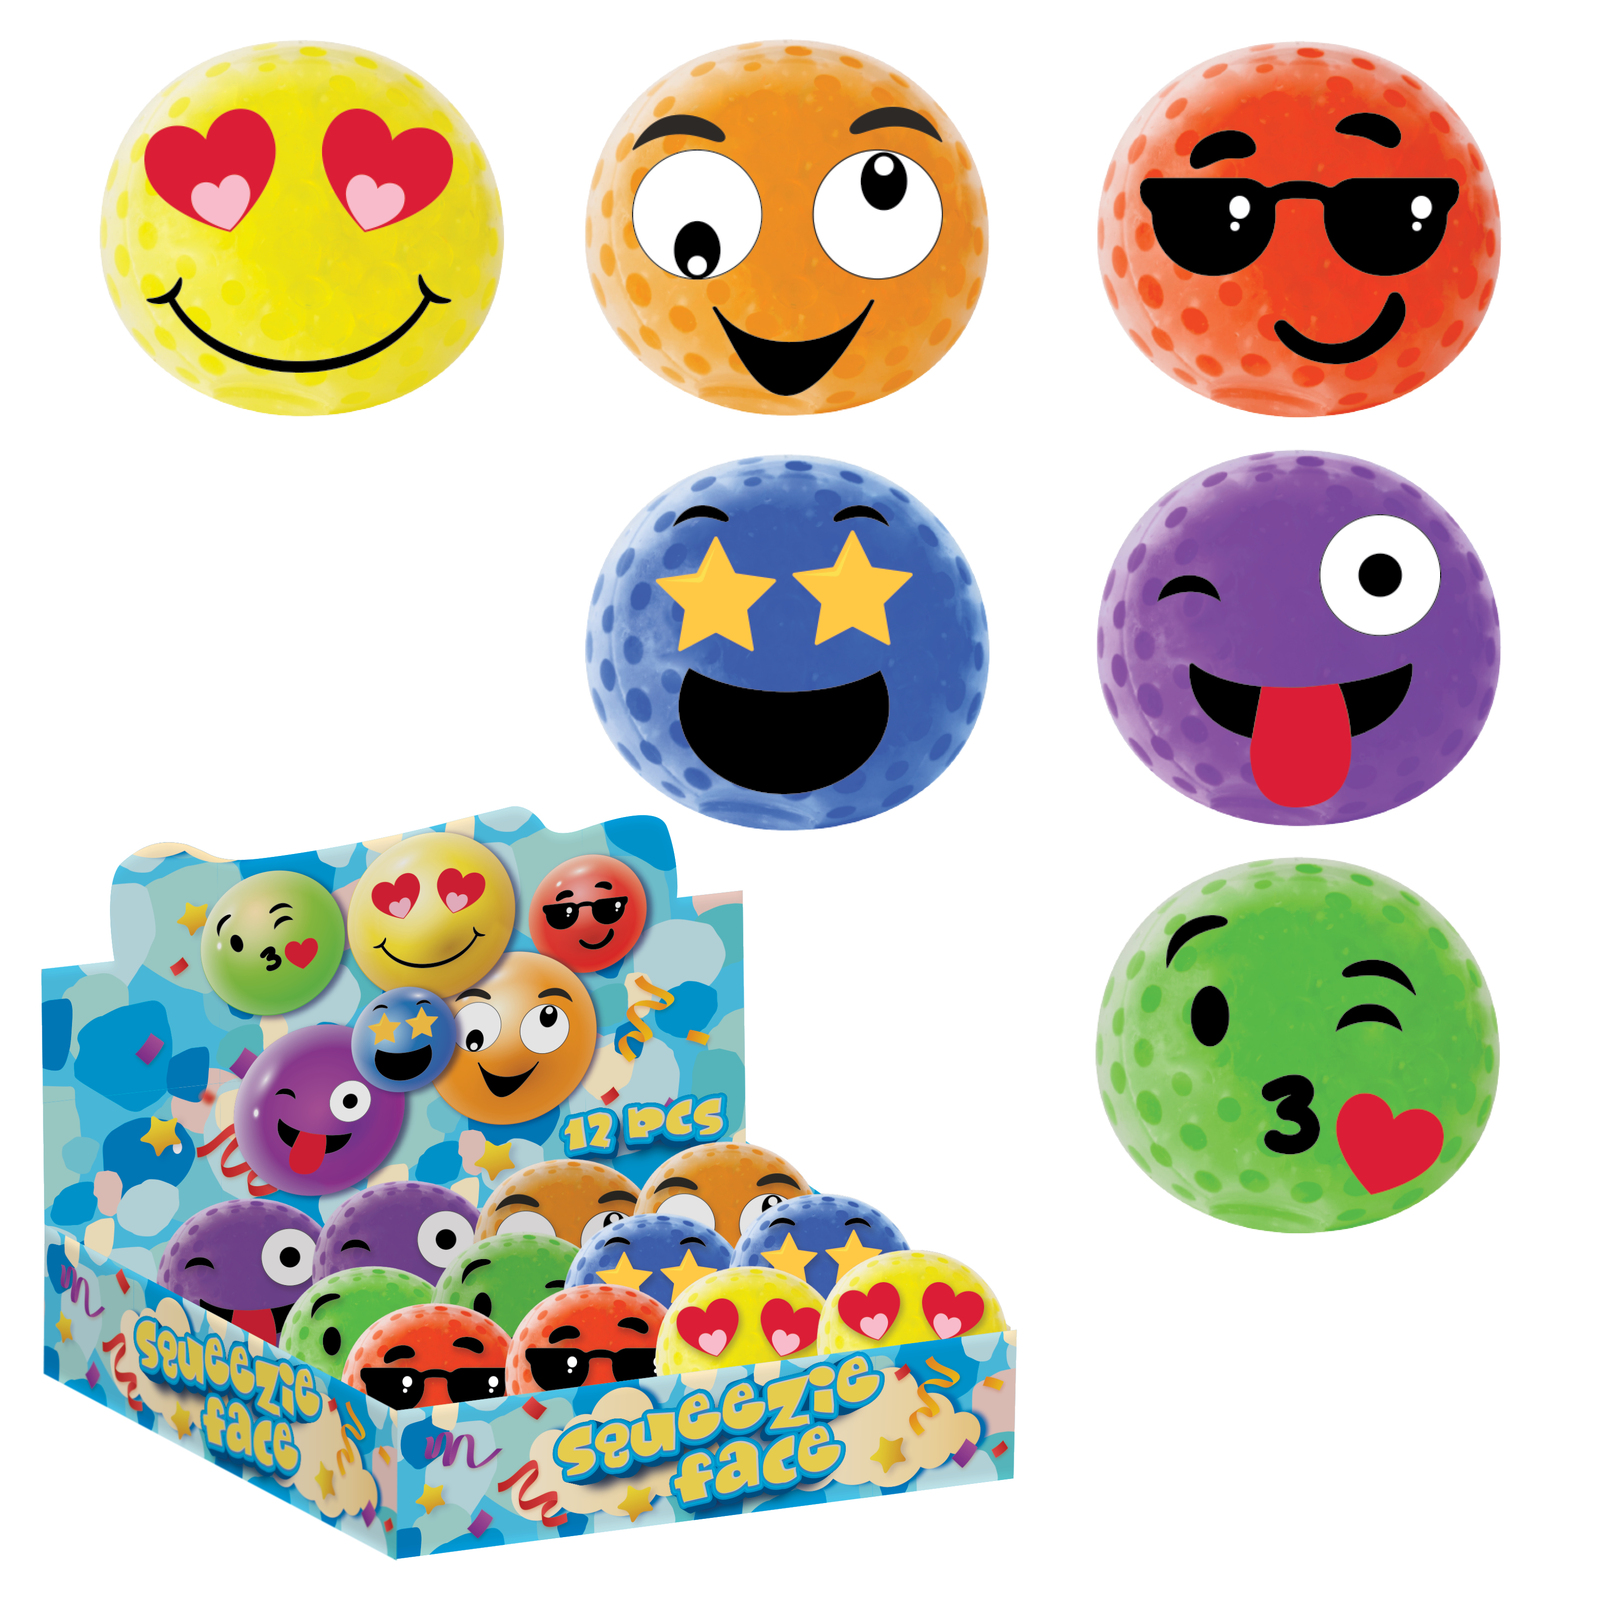 Anti Stress Squeezie Face - Pack of 12 ($2.00 ea)